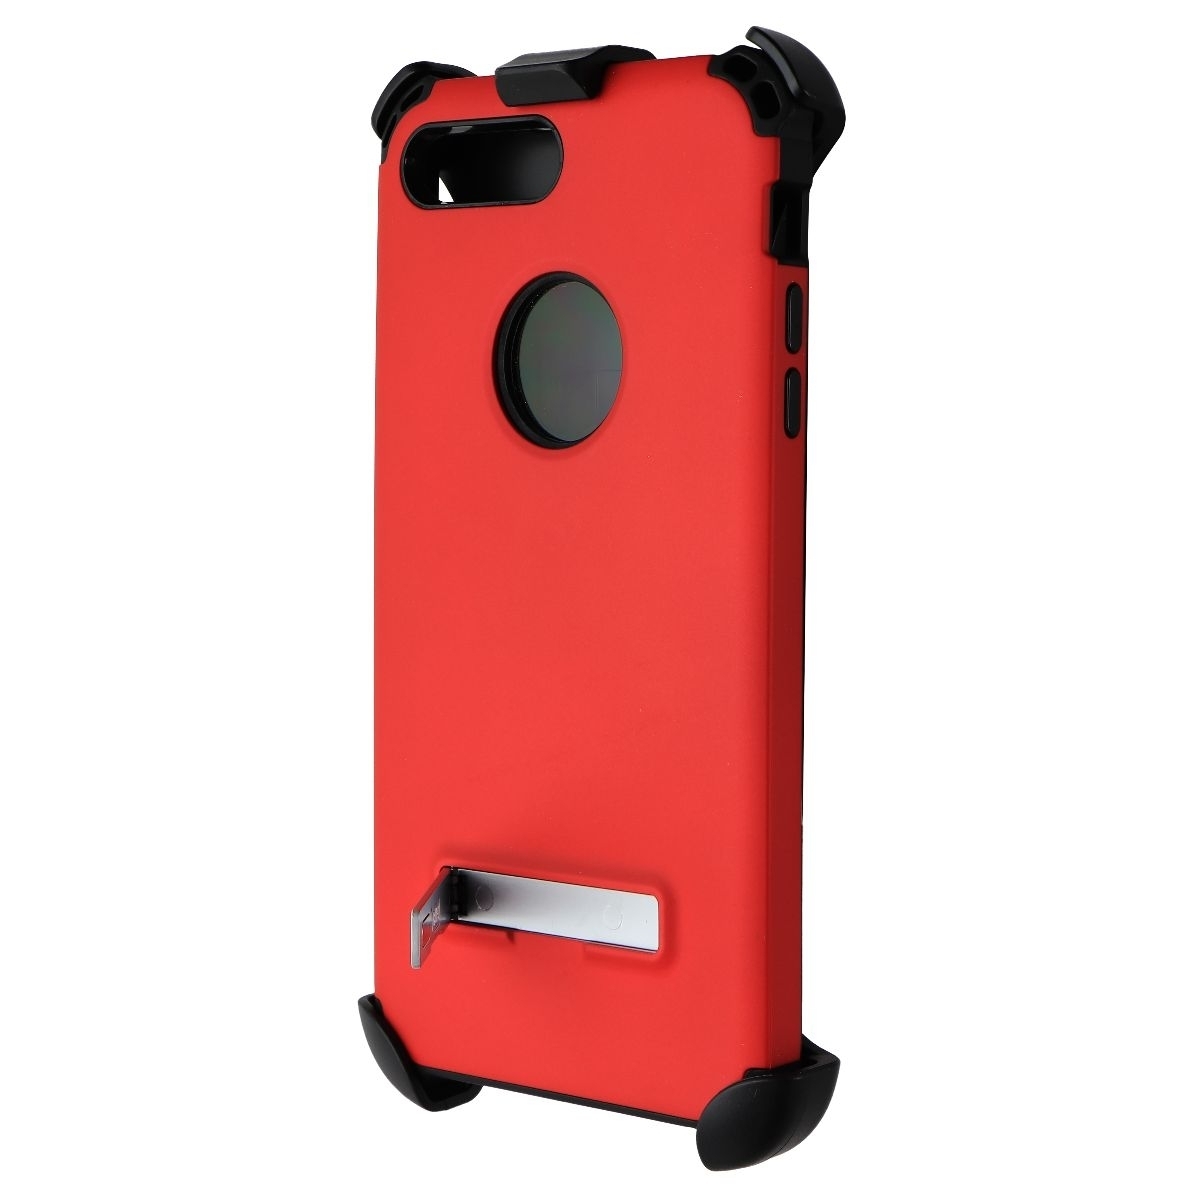 Seidio DILEX Case With Kickstand And Holster For IPhone 7 Plus (Only) - Red (Refurbished)